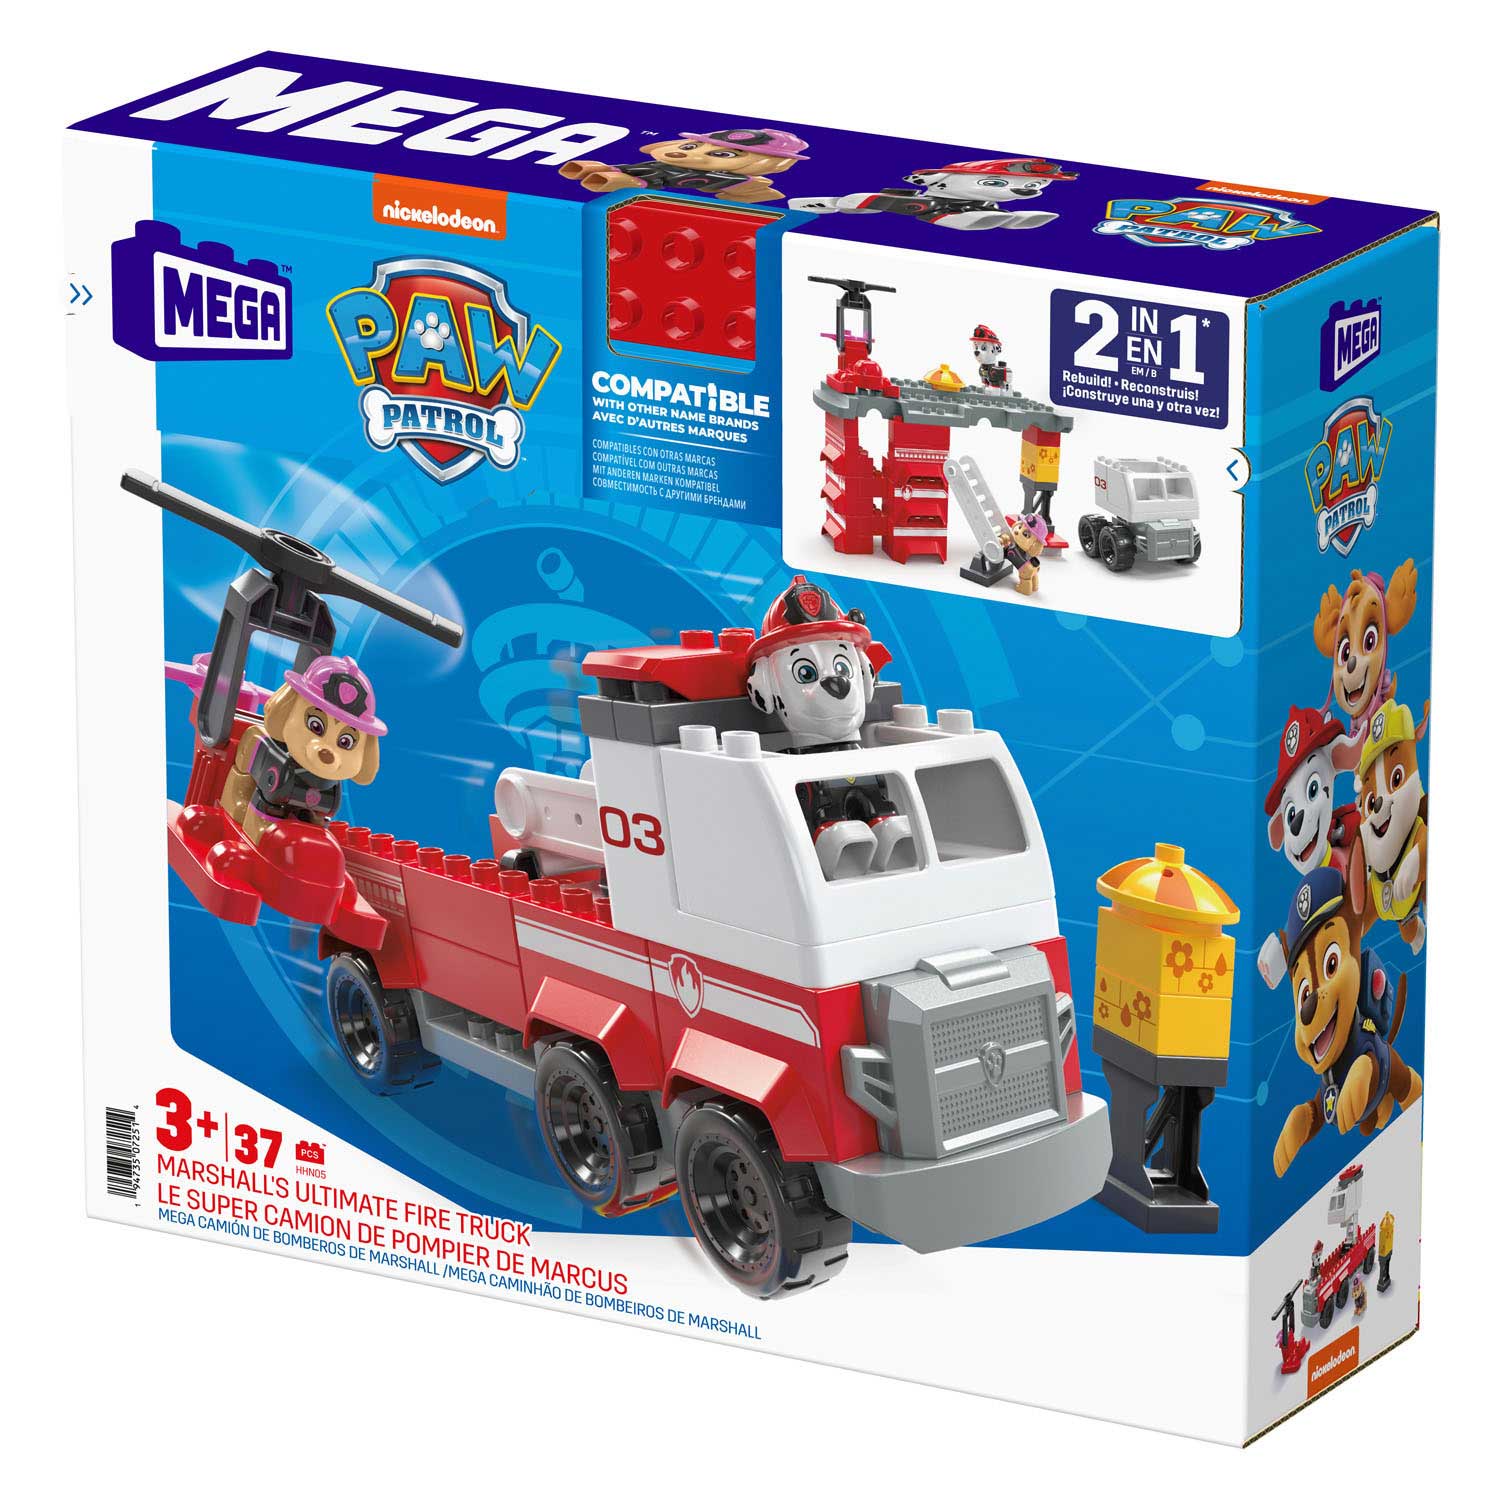 How to Build Lego Paw Patrol Marshall Fire Truck Vehicle 